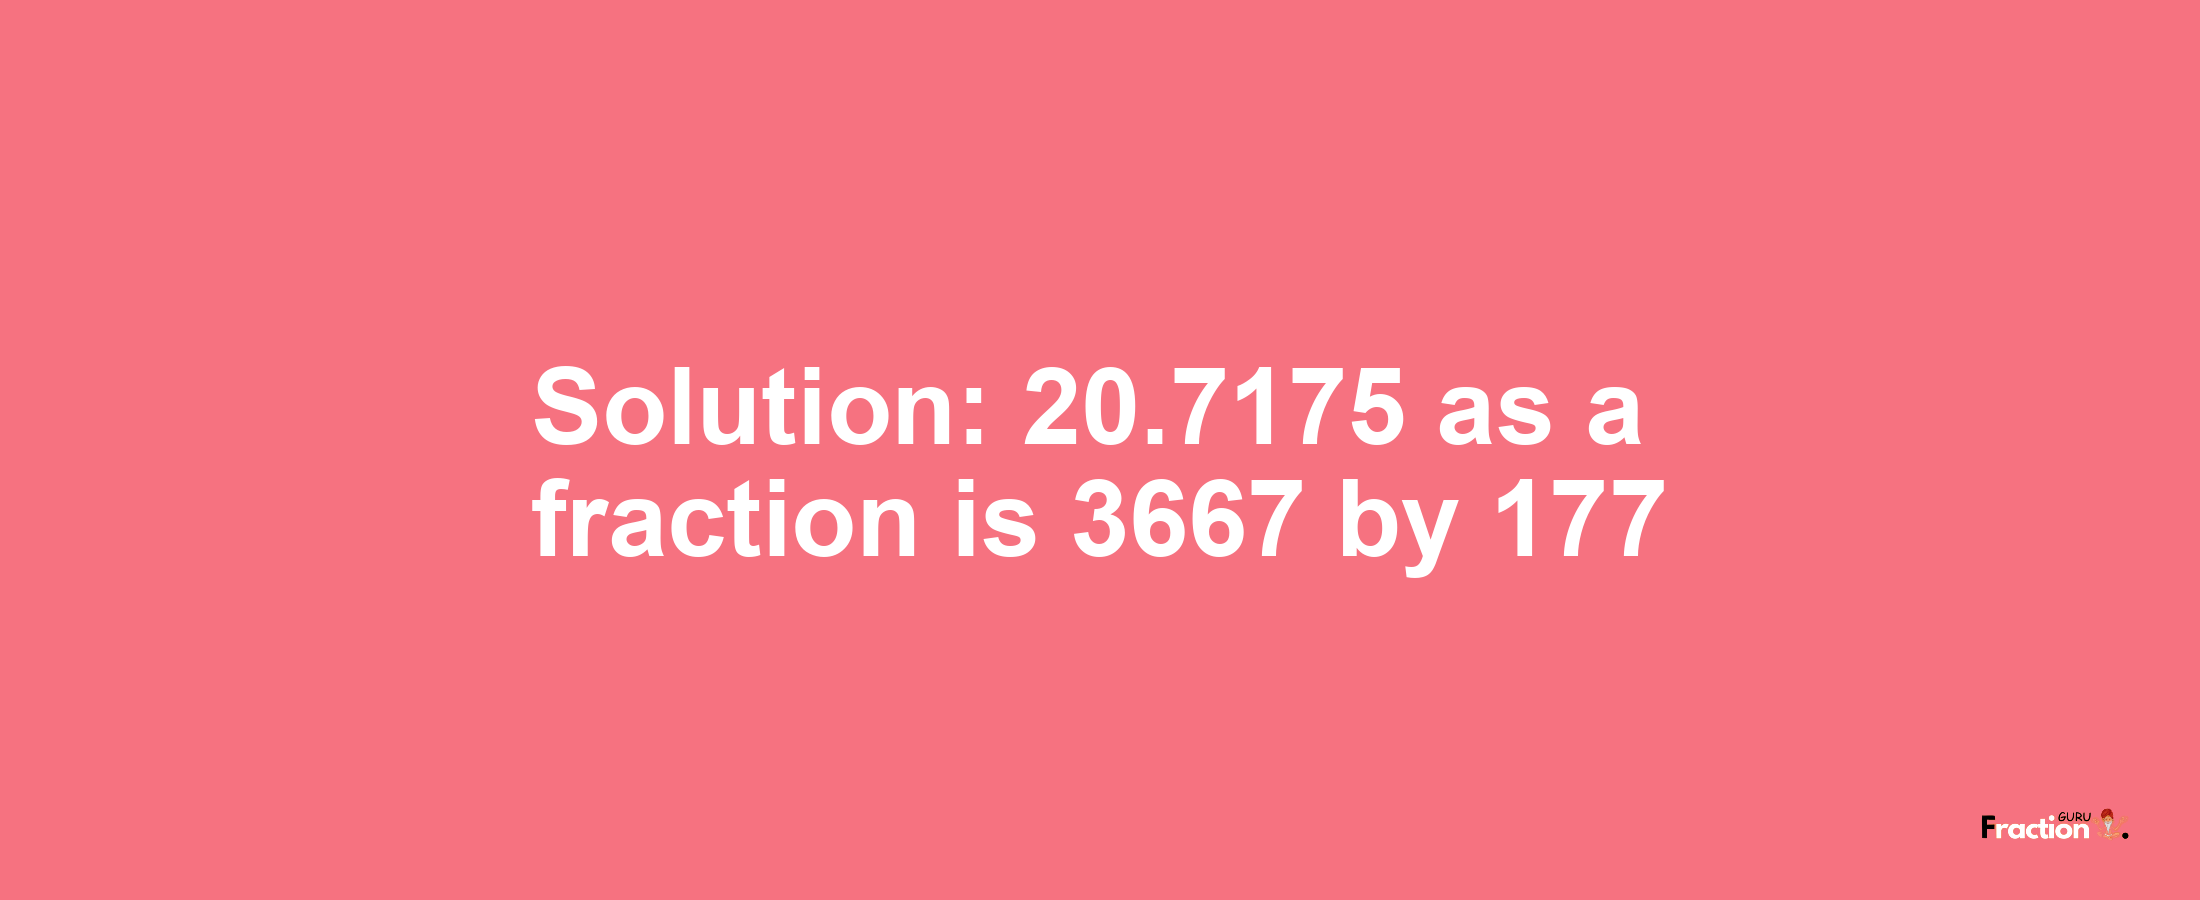 Solution:20.7175 as a fraction is 3667/177